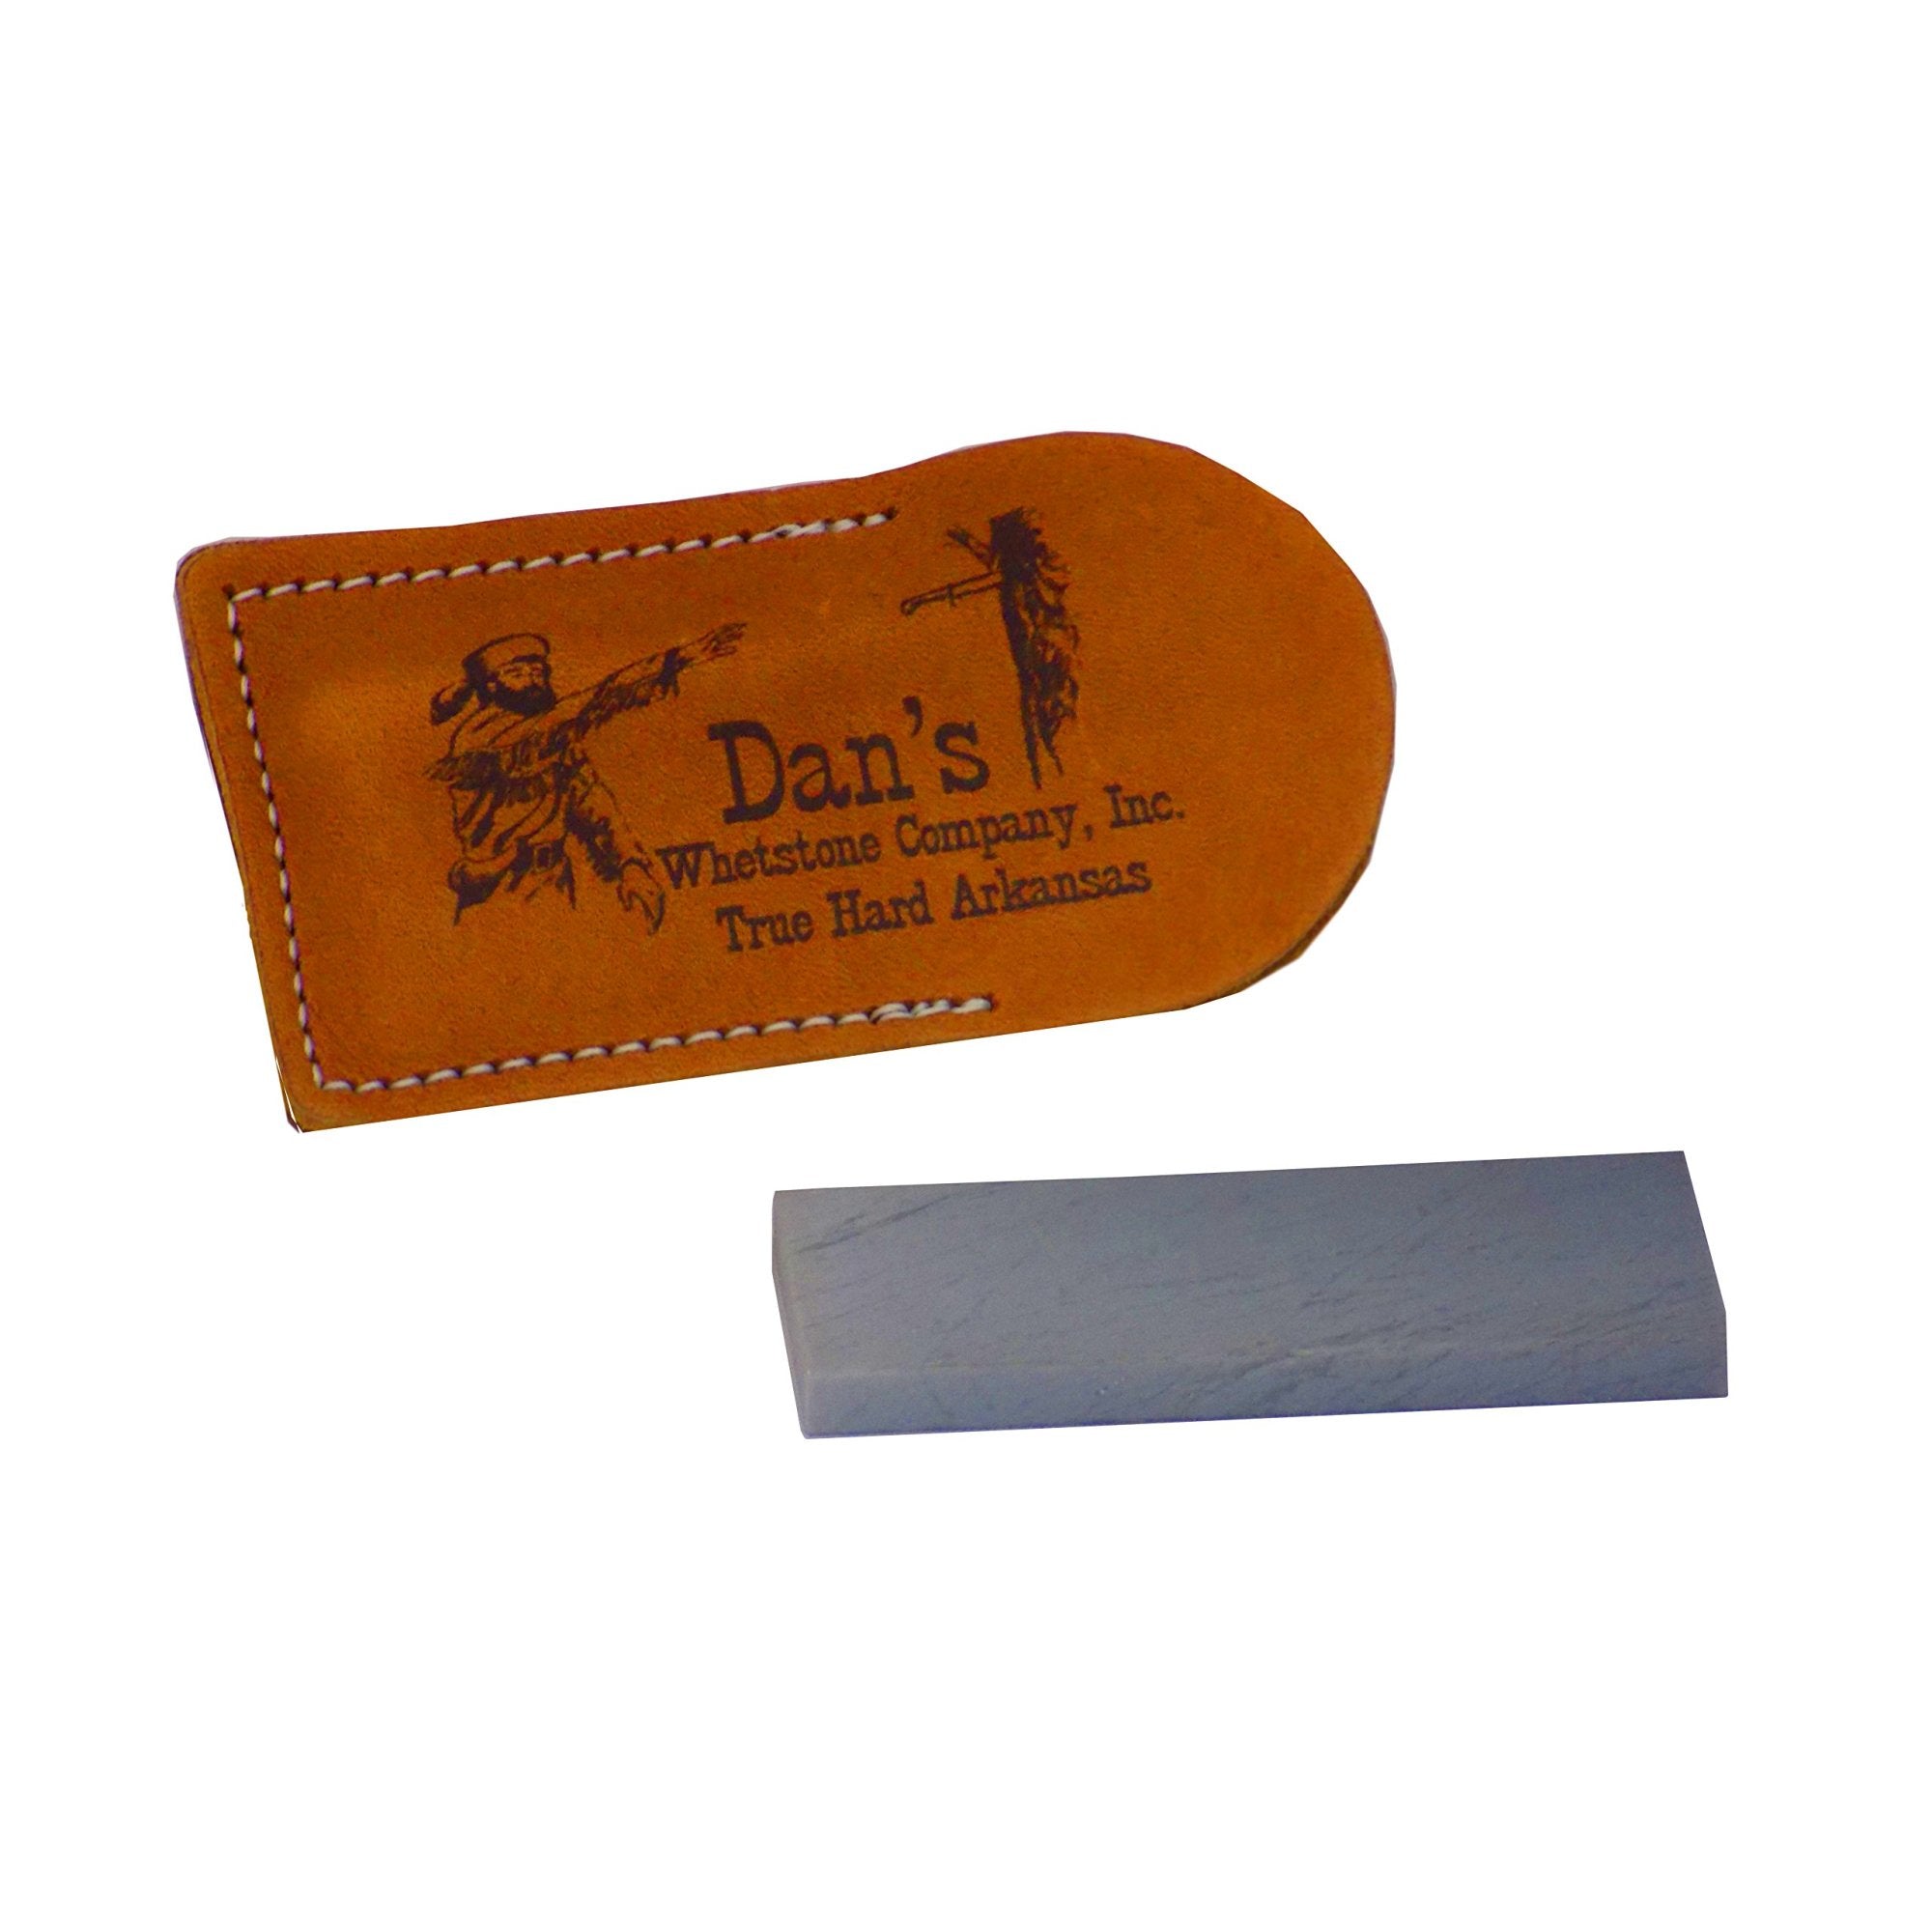 Buy Genuine Arkansas True Hard Pocket Knife Sharpening Stone Whetstone 3 x  1 x 1/4 in Leather Pouch XAP-13A-L at Prime Tools for only $ 24.95